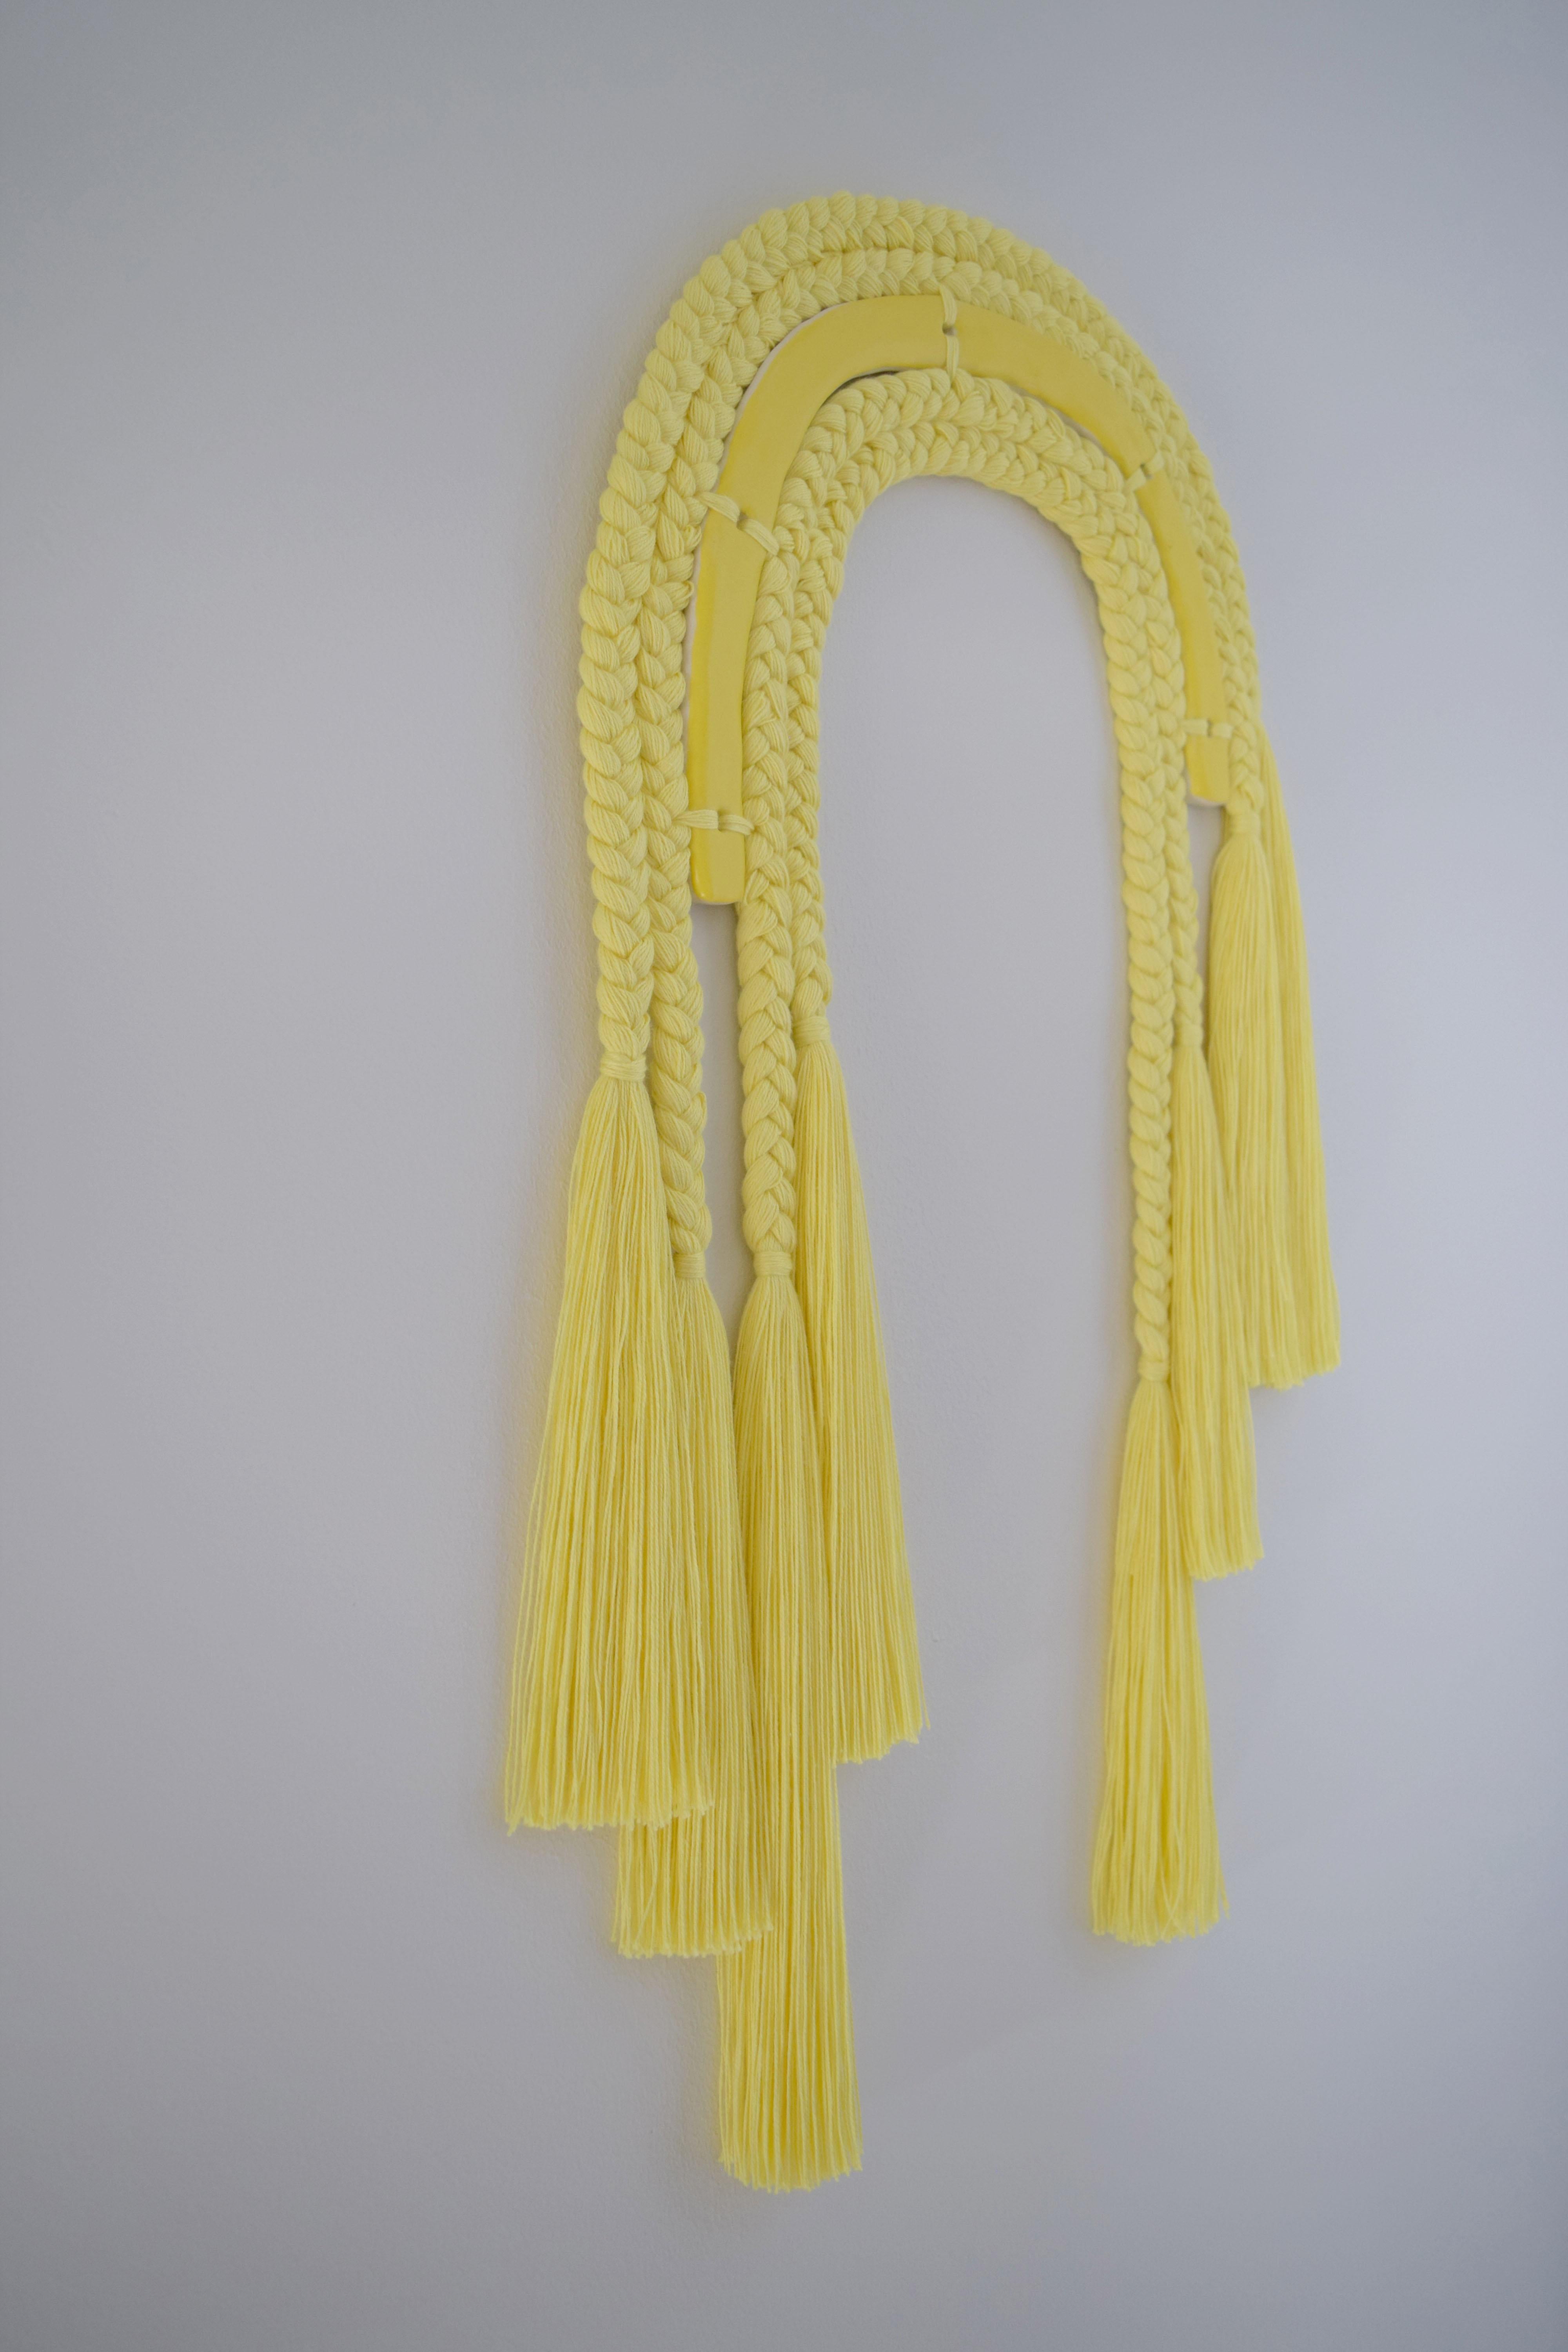 One of a kind wall sculpture #543

One of a kind wall sculpture in mixed materials of ceramic and braided cotton fibers. A ceramic core, glazed in satin yellow is surrounded by braids in yellow cotton. Braids transition into varying lengths of